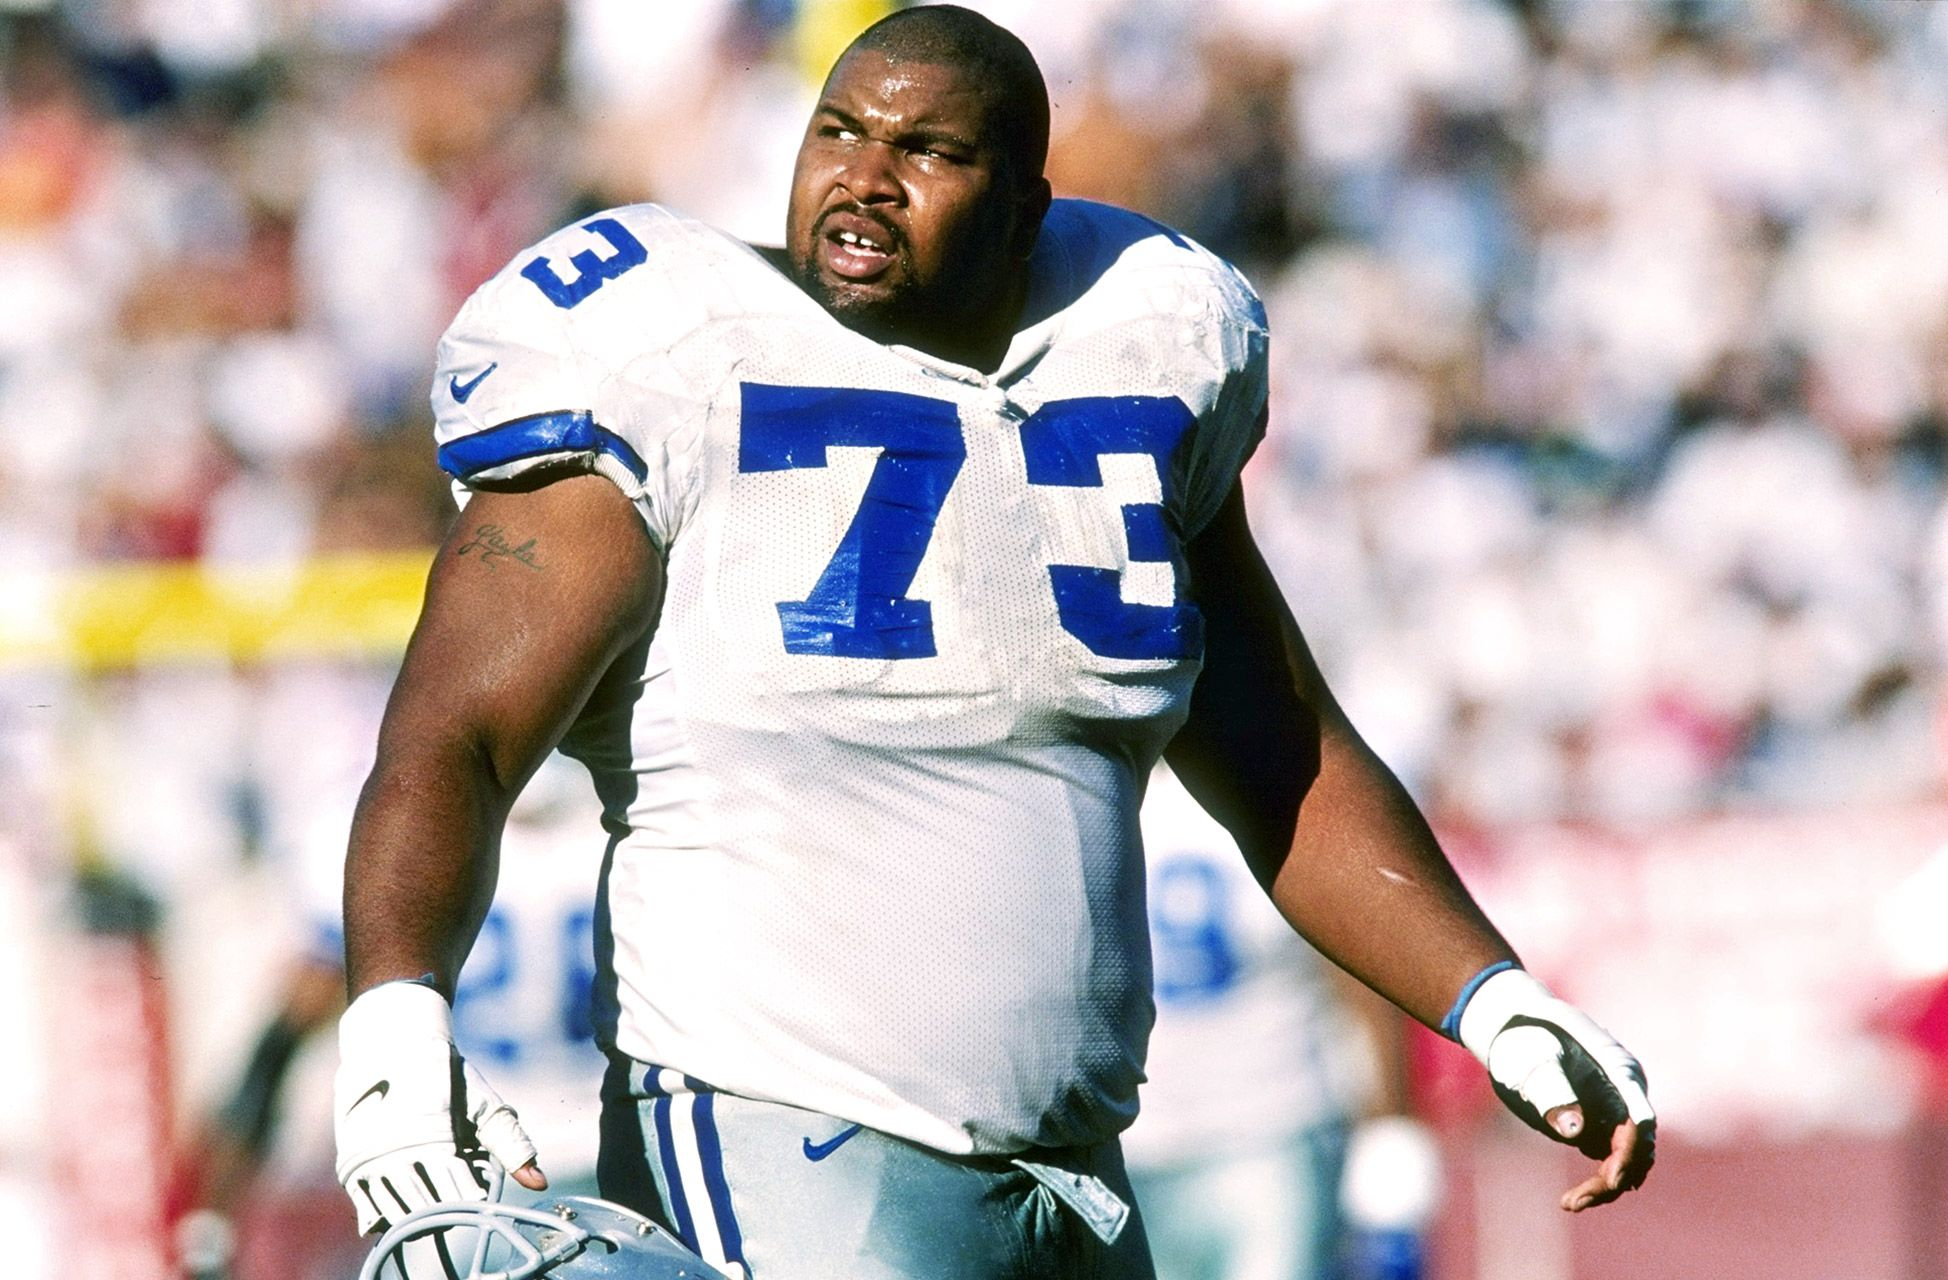 Christian Mahogany Tribute to Larry Allen with Detroit Lions Jersey No. 73